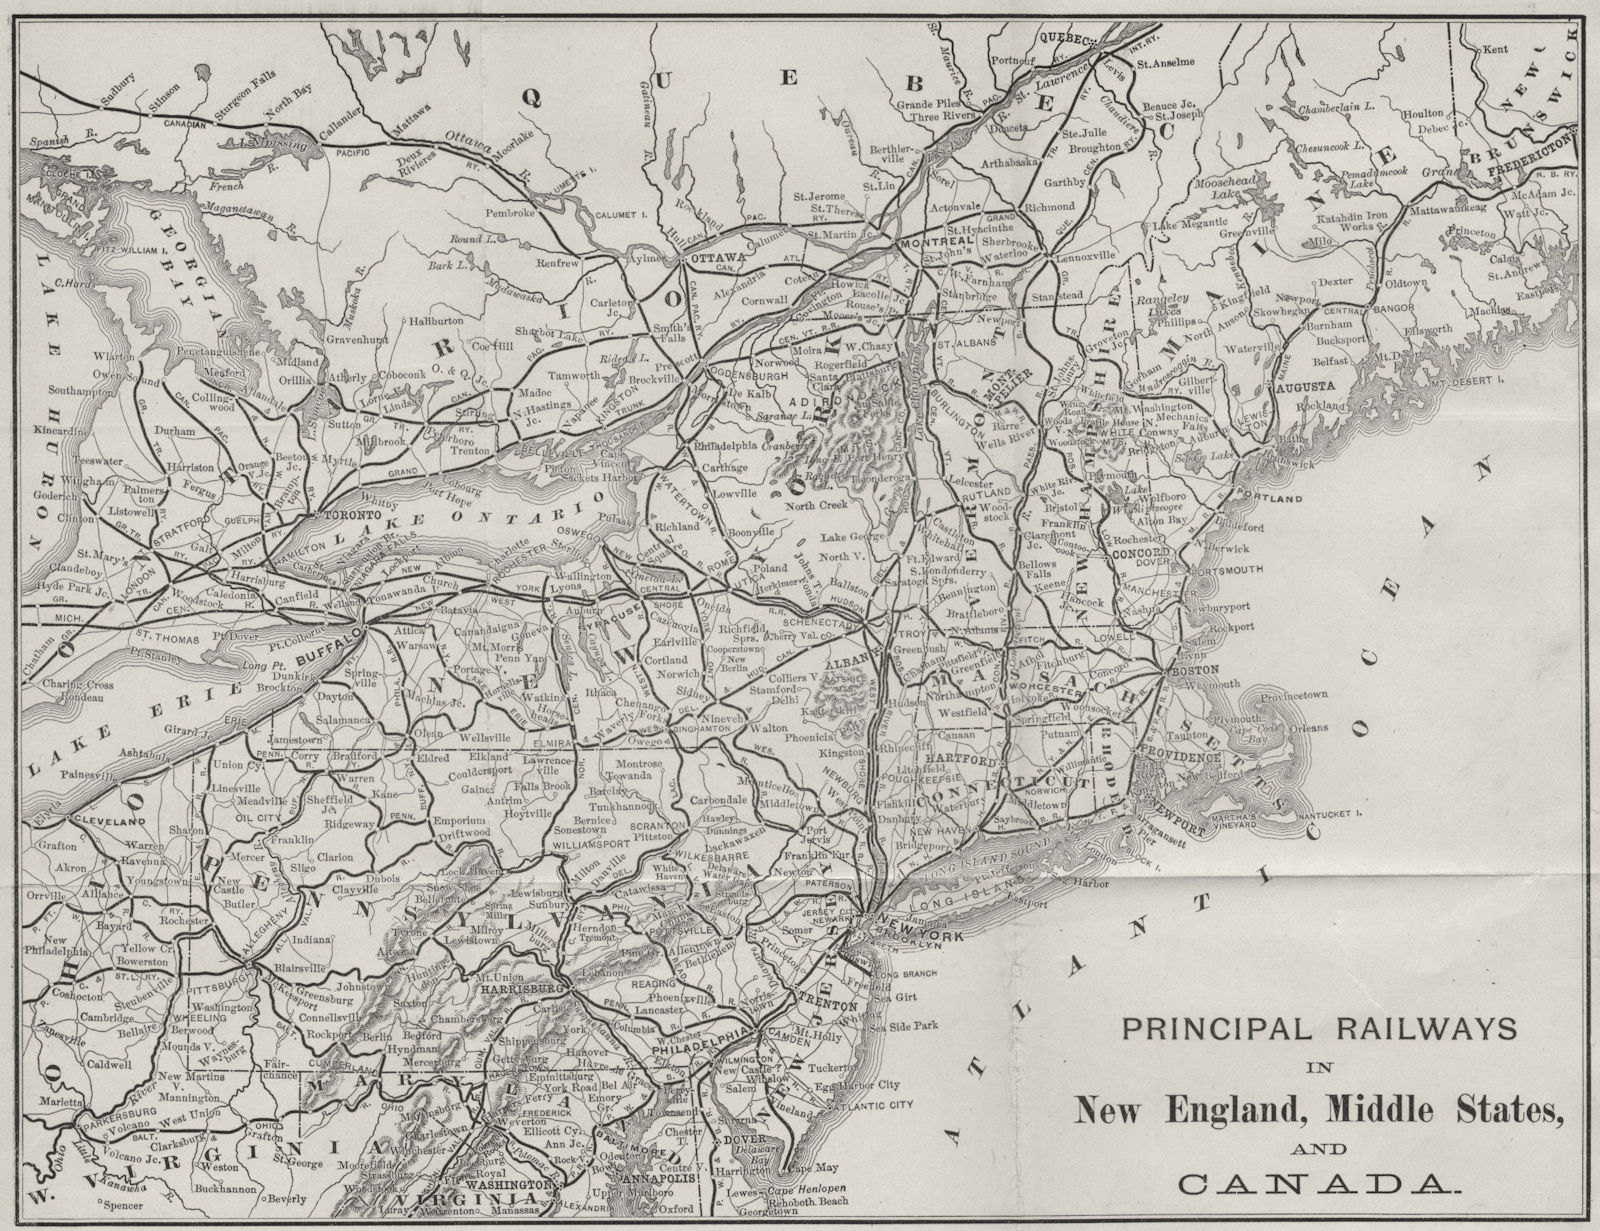 USA. Map of the Principal railways in New England, Mid West  & Canada 1893